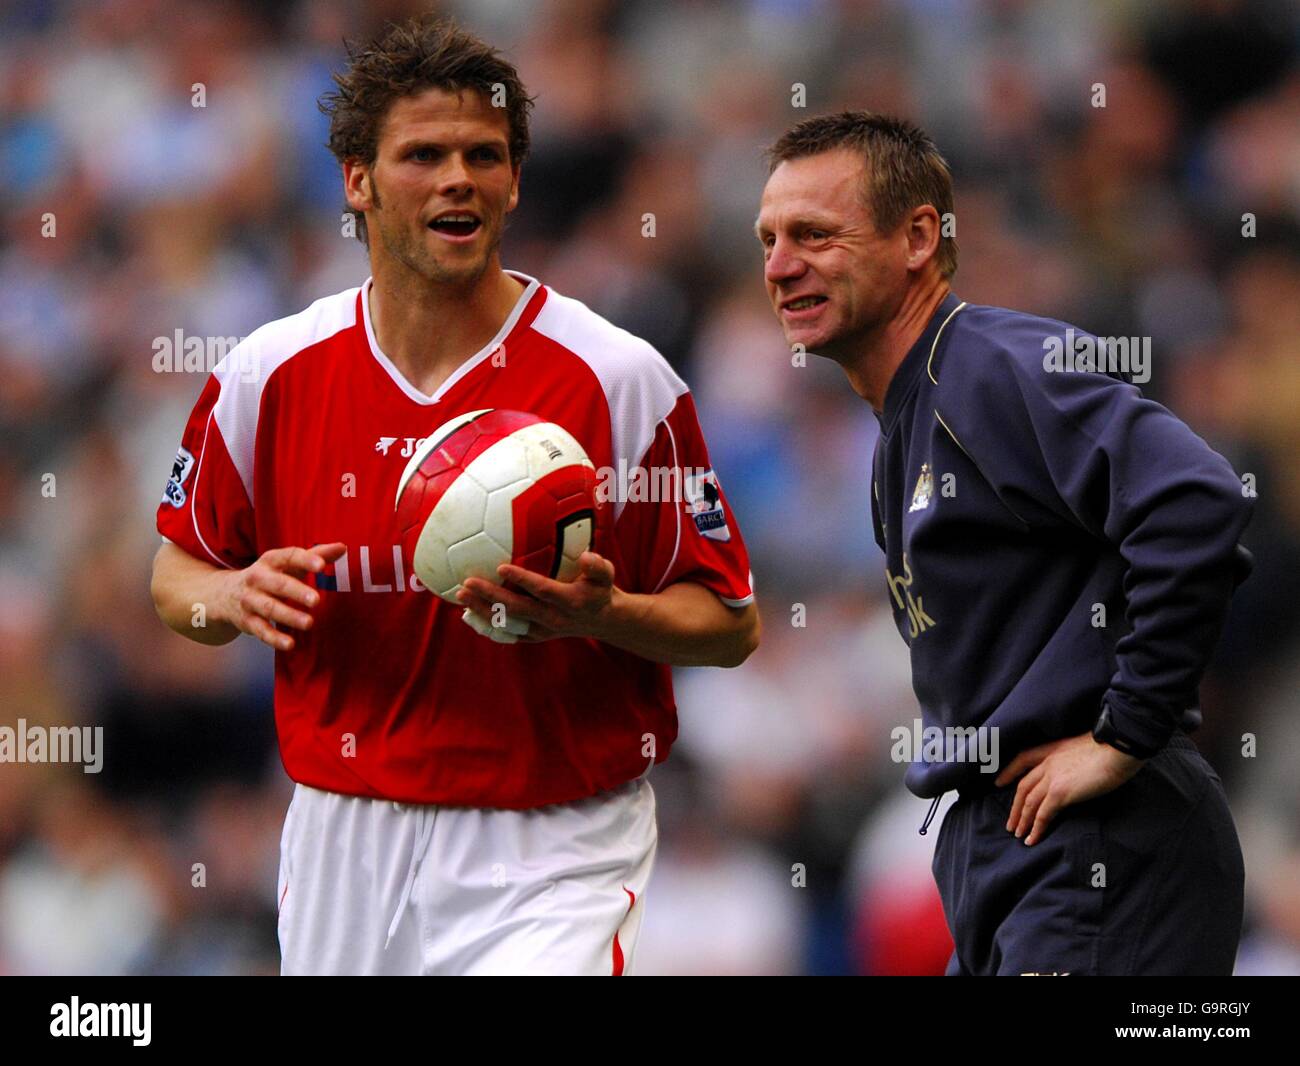 Soccer - FA Barclays Premiership - Manchester City v Charlton Athletic - The City of Manchester Stadium. Manchester City manager Stuart Pearce shares a joke with Charlton Athletic's Hermann Hreidarsson Stock Photo